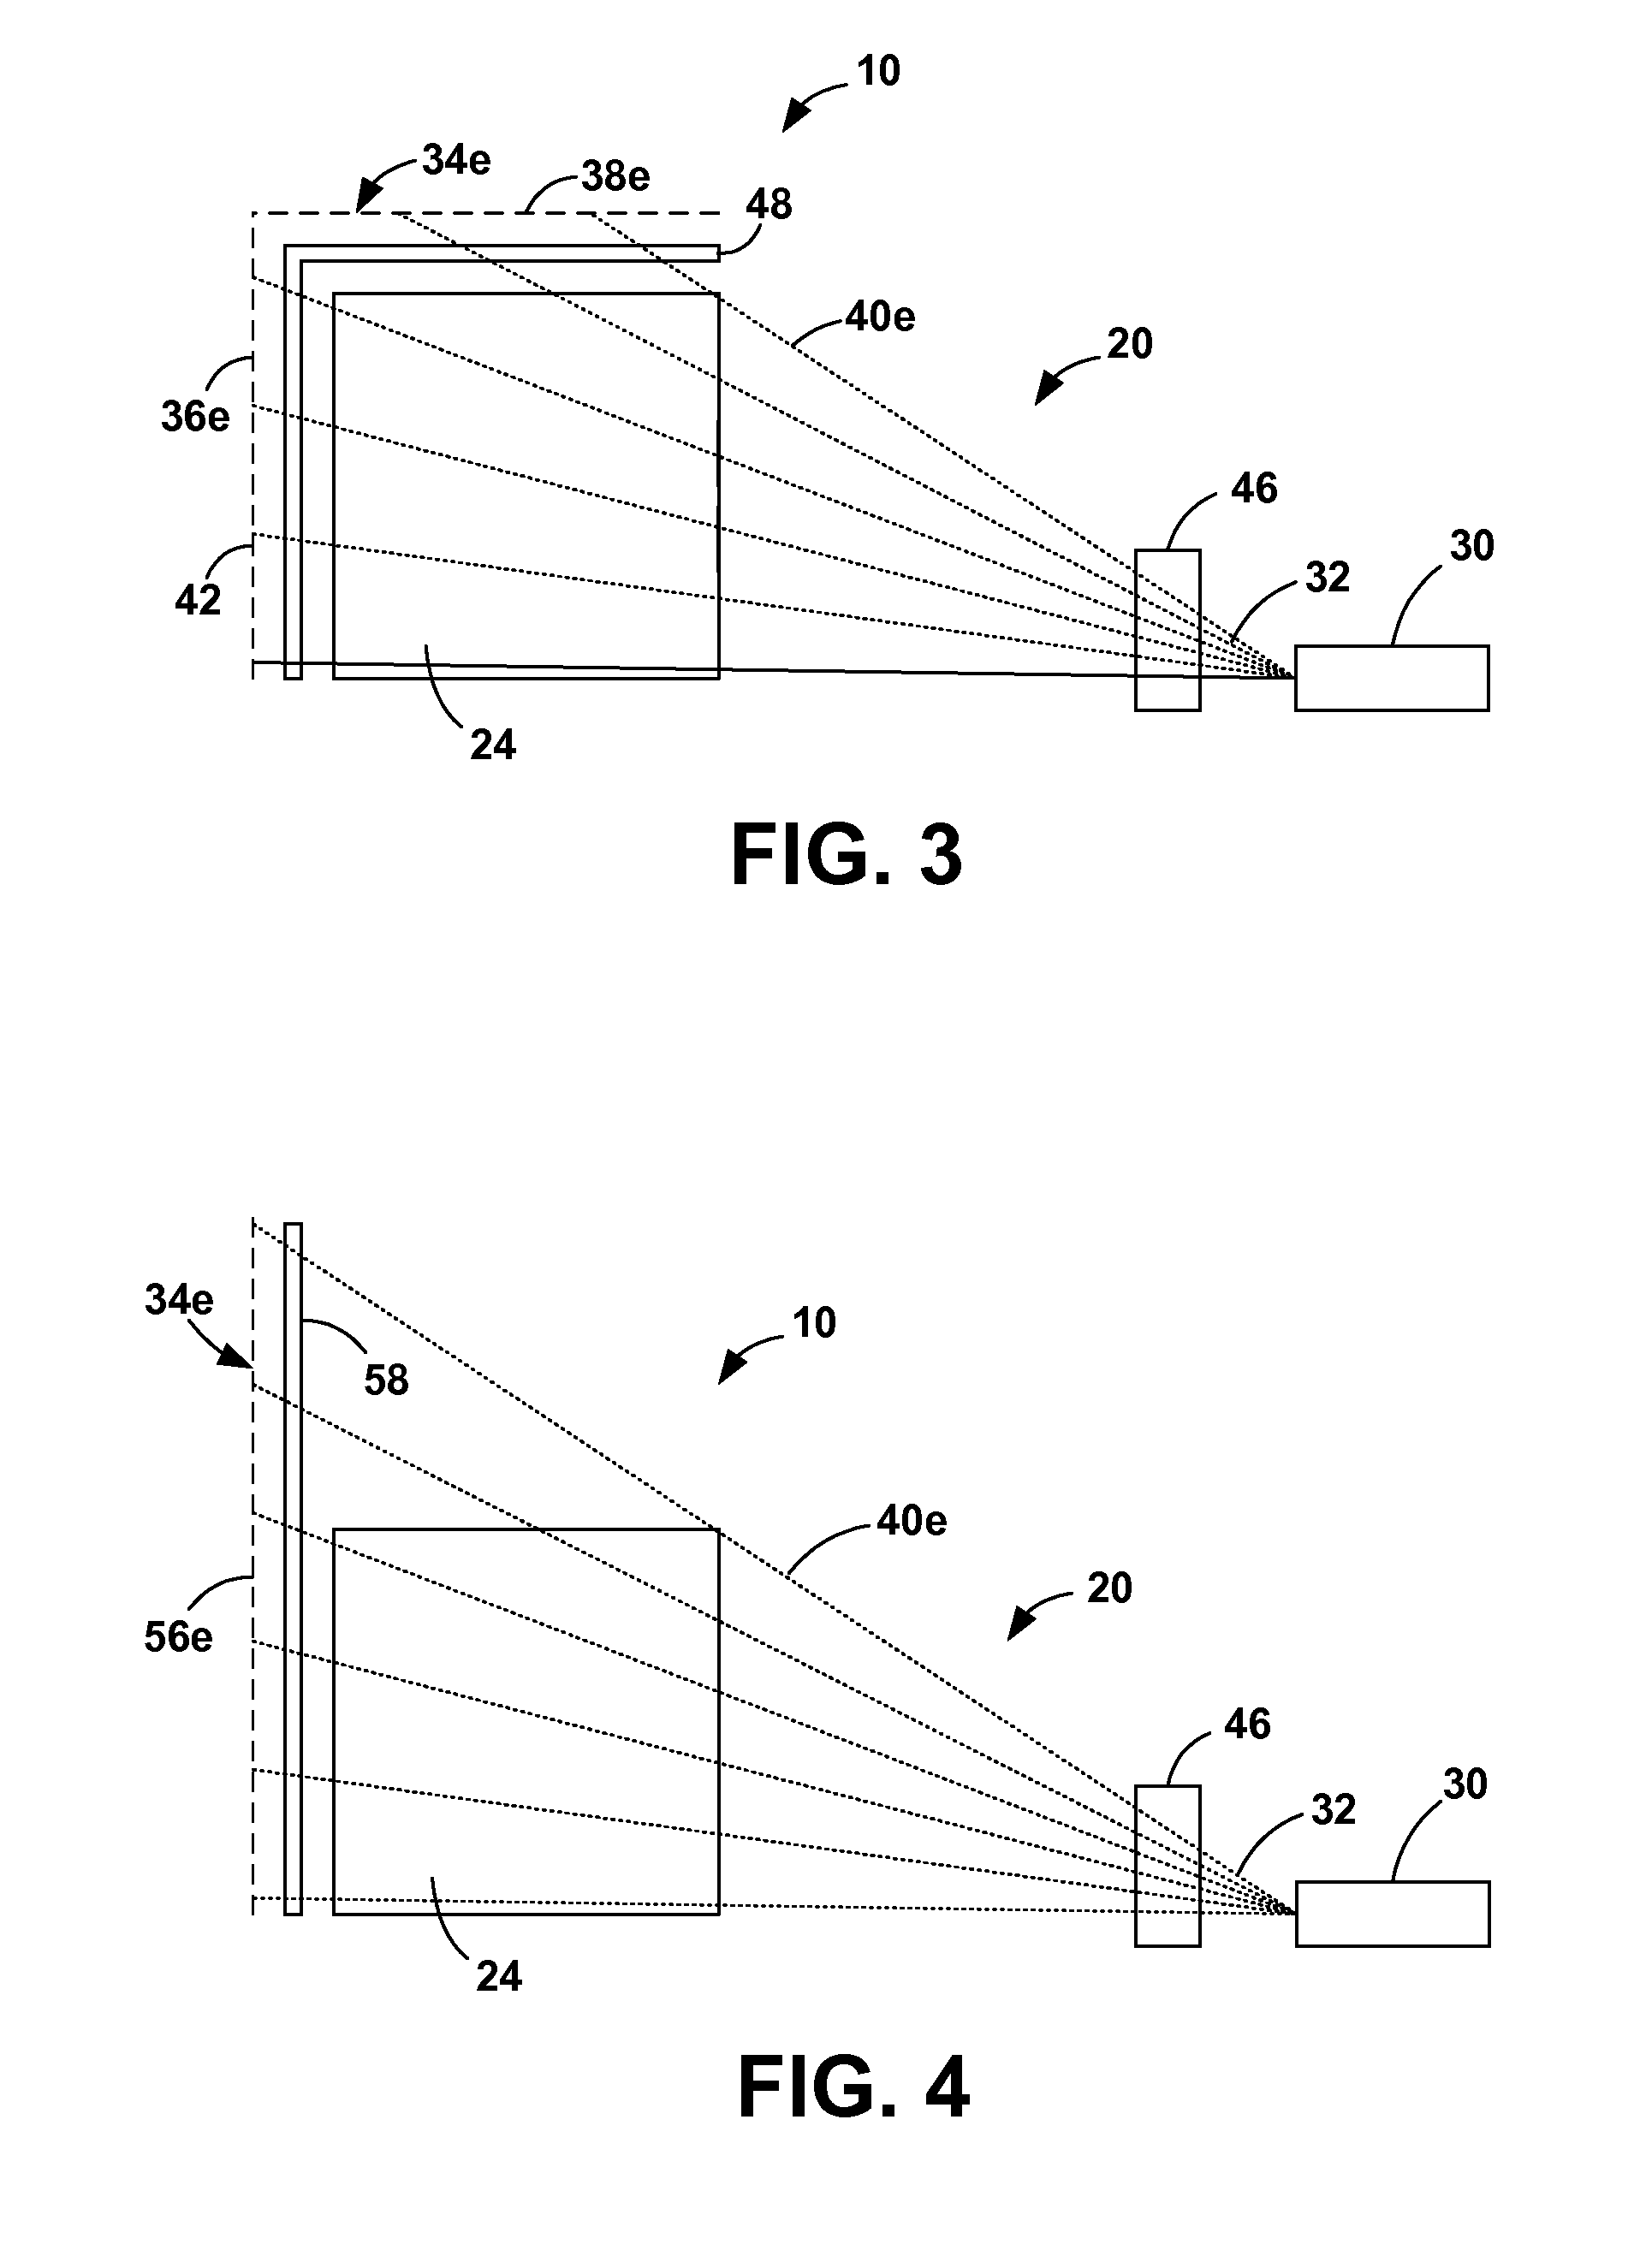 Method for detecting a nuclear weapon in a shipping container or other vehicle using x-rays